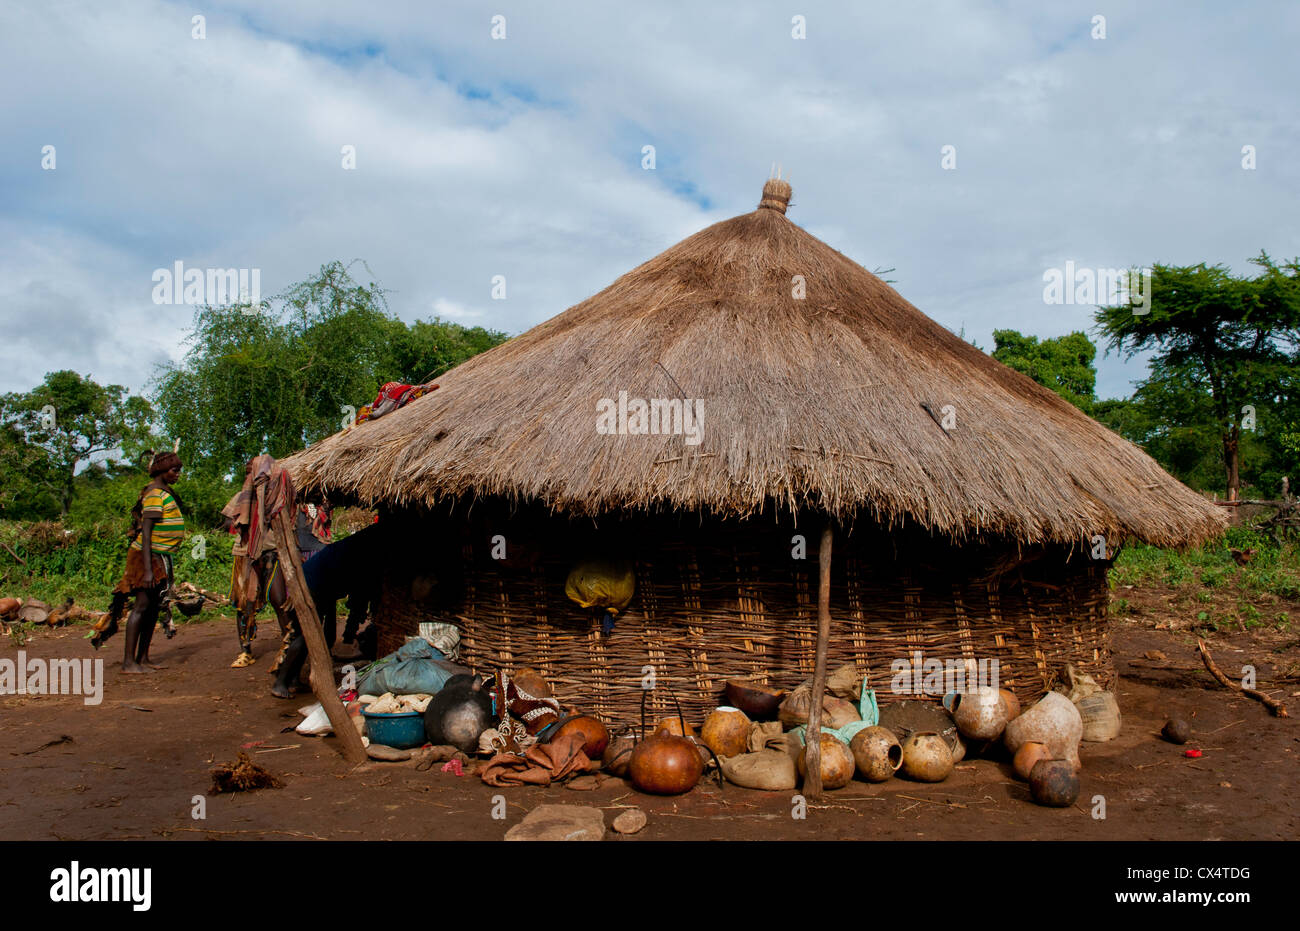 Turmi Ethiopia Africa village Lower Omo Valley tribal tribe Bena village with hut home with thatched roof Stock Photo